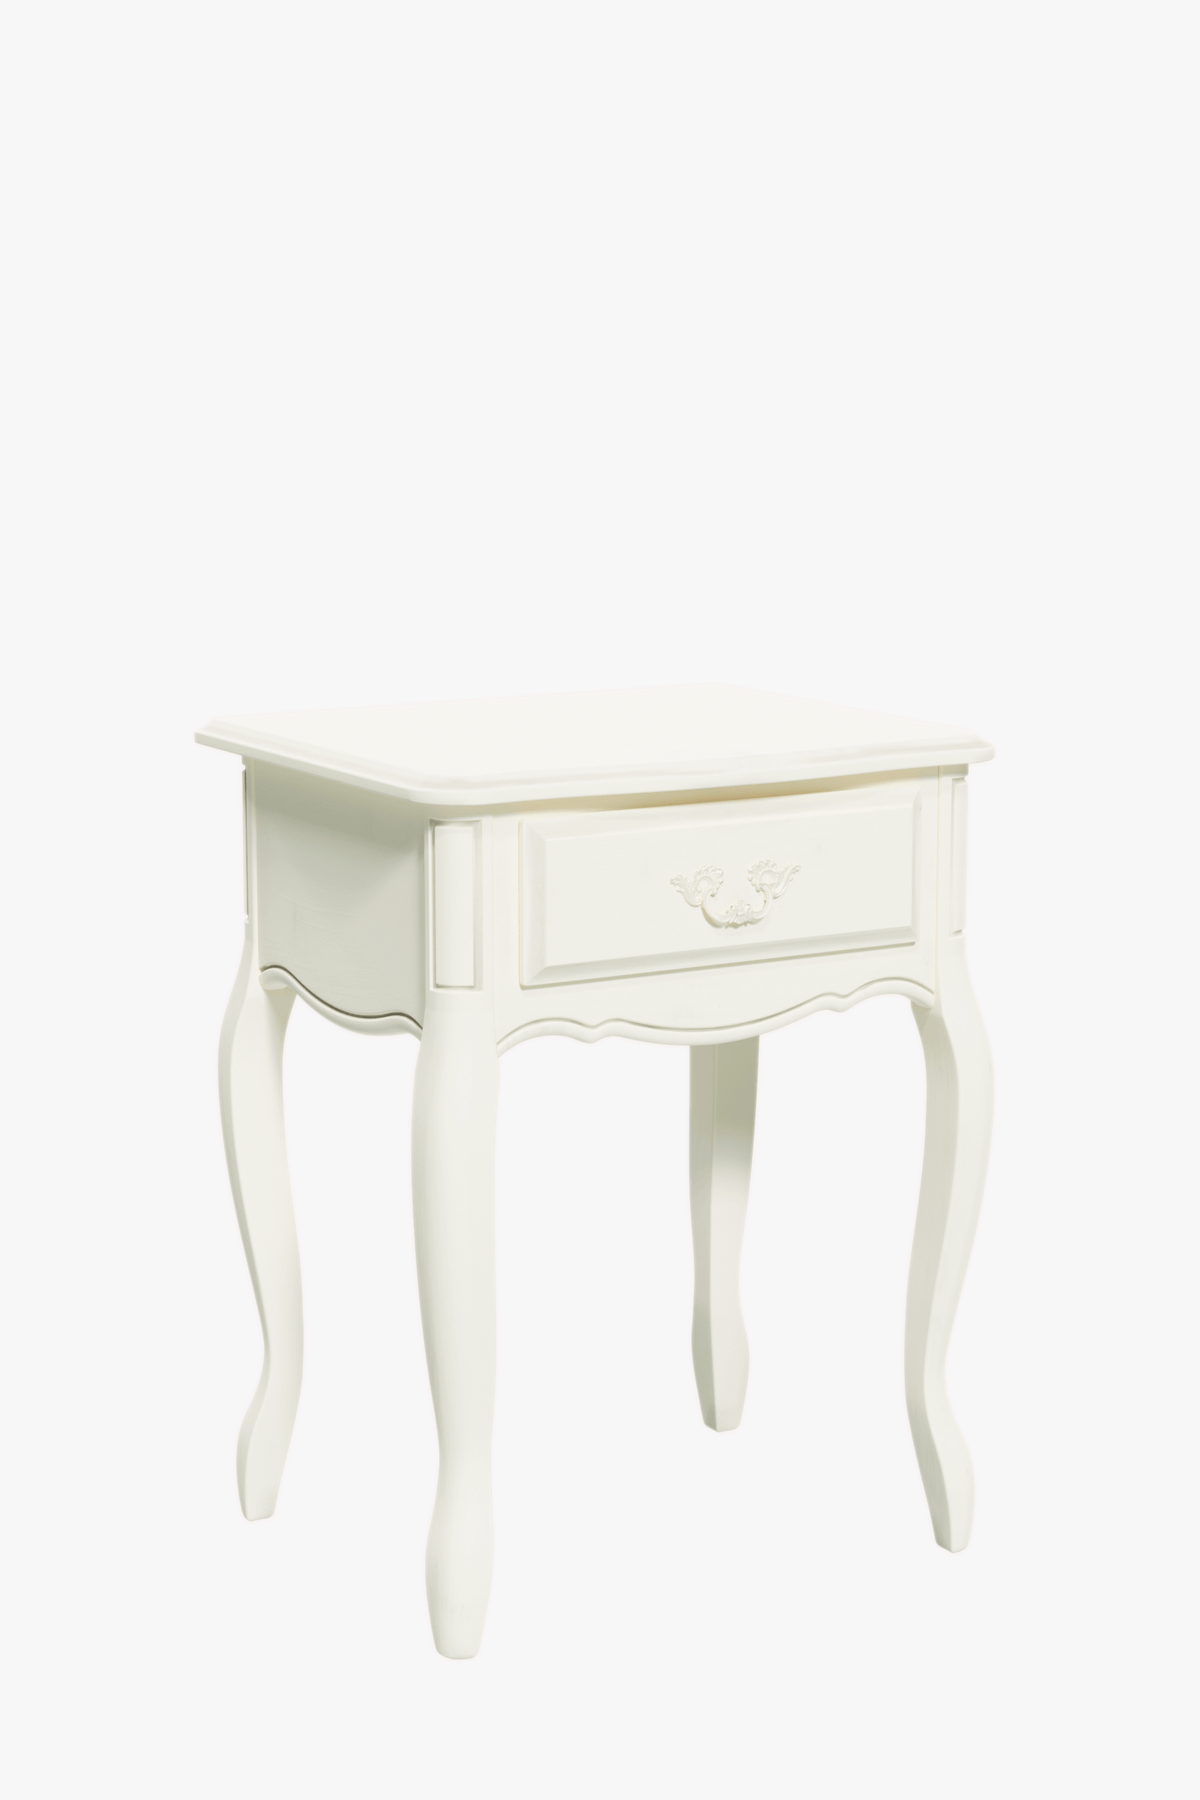 Provencale 1 Drawer Side Table